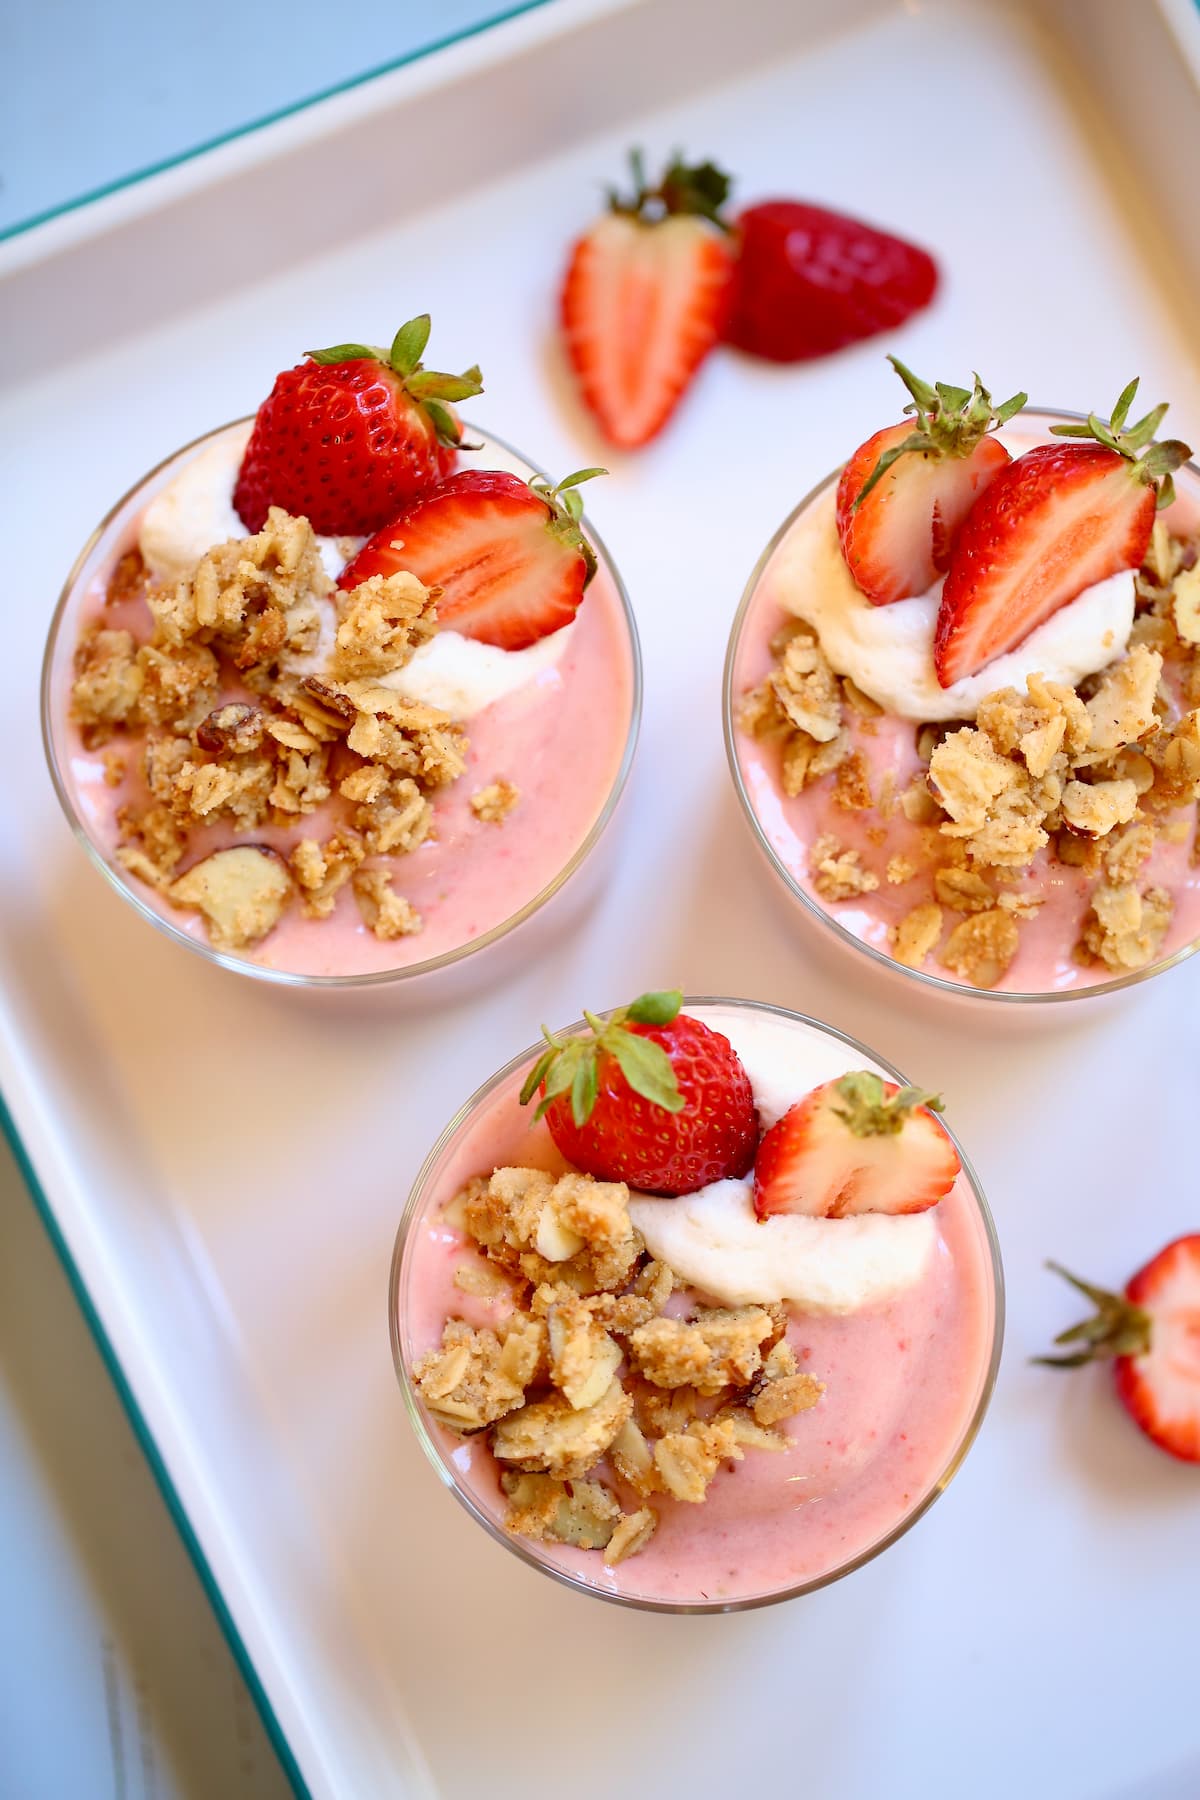 some strawberry flavored smoothies on a white tray.